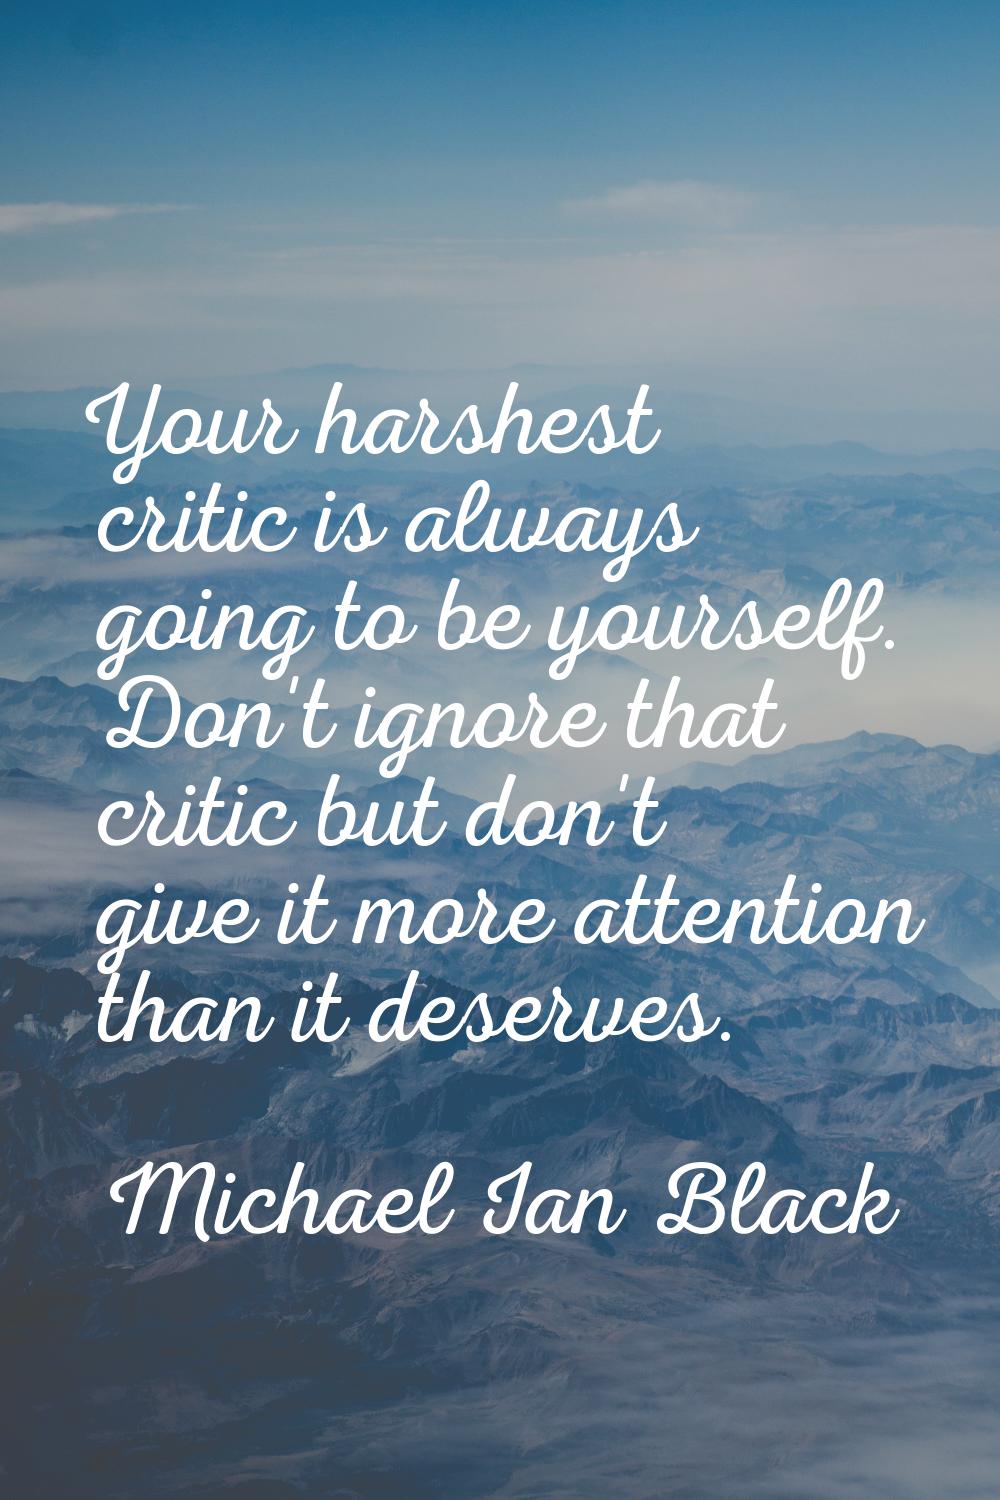 Your harshest critic is always going to be yourself. Don't ignore that critic but don't give it mor